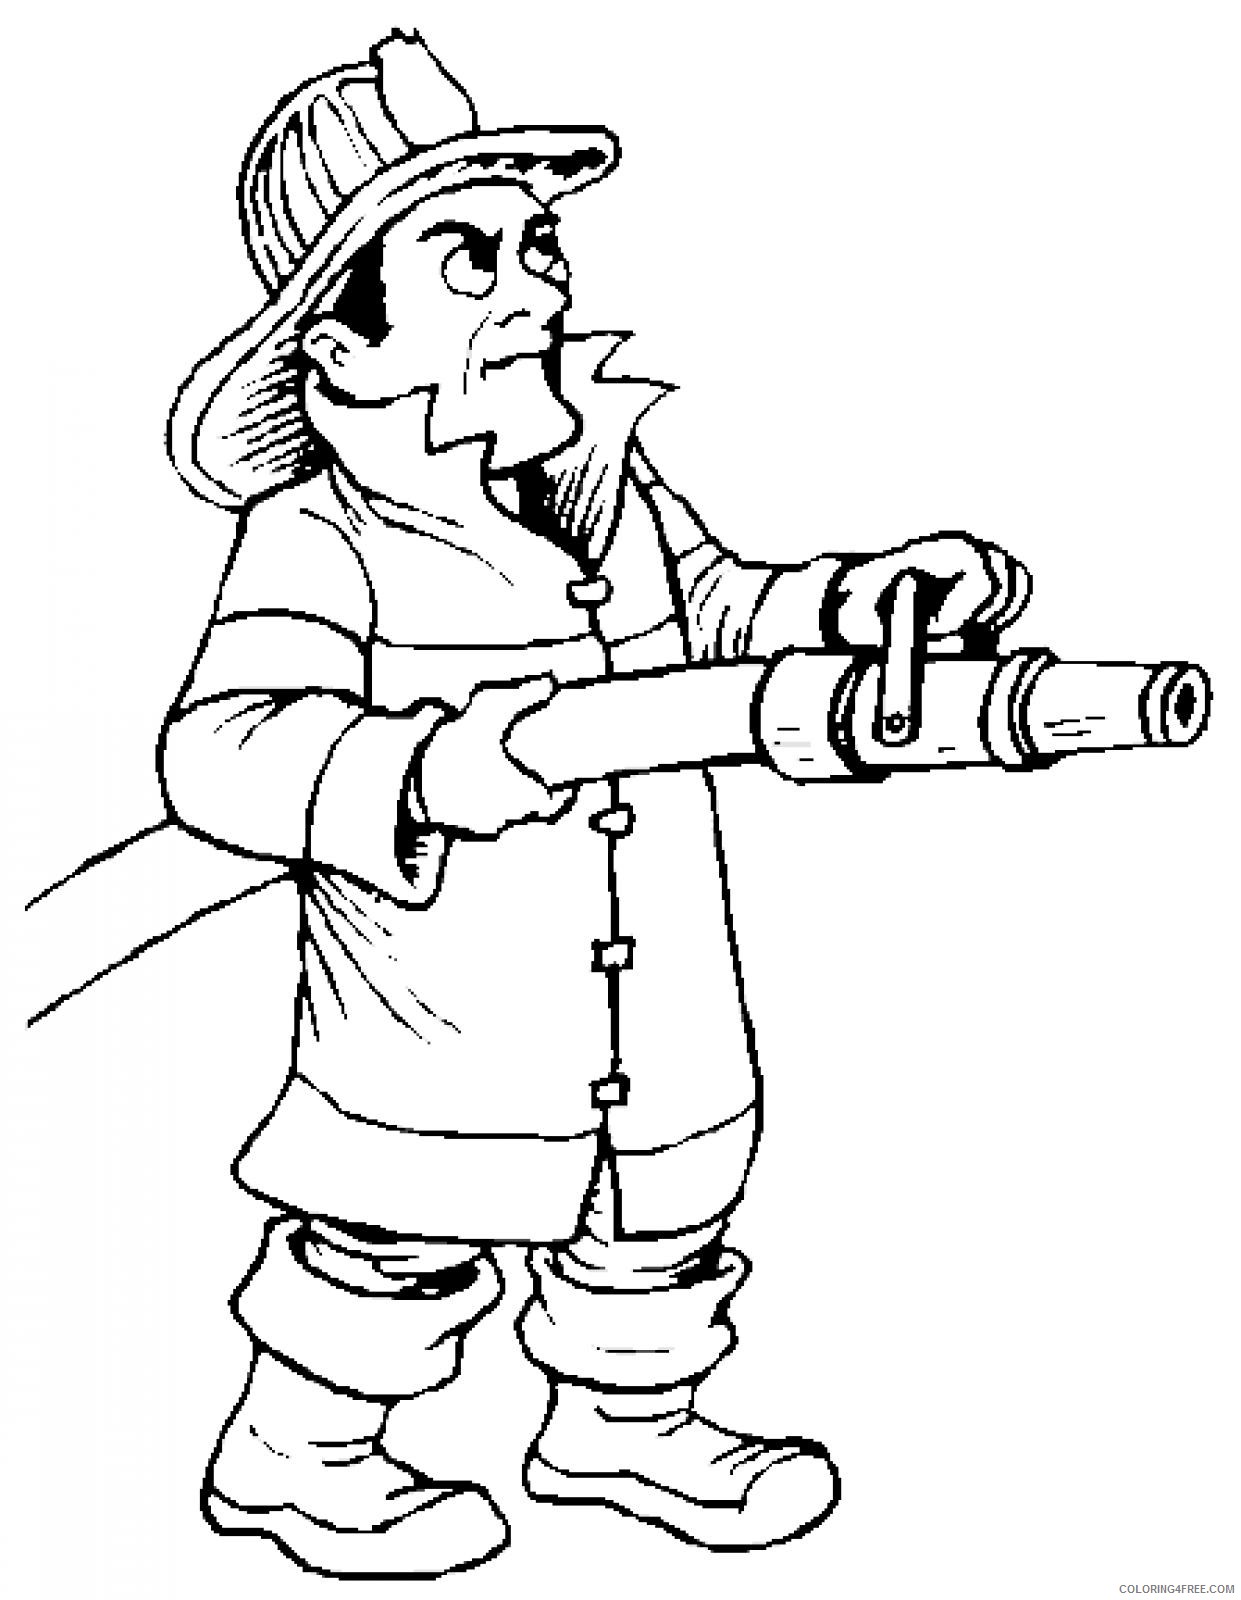 firefighter-coloring-pages-free-to-print-coloring4free-coloring4free